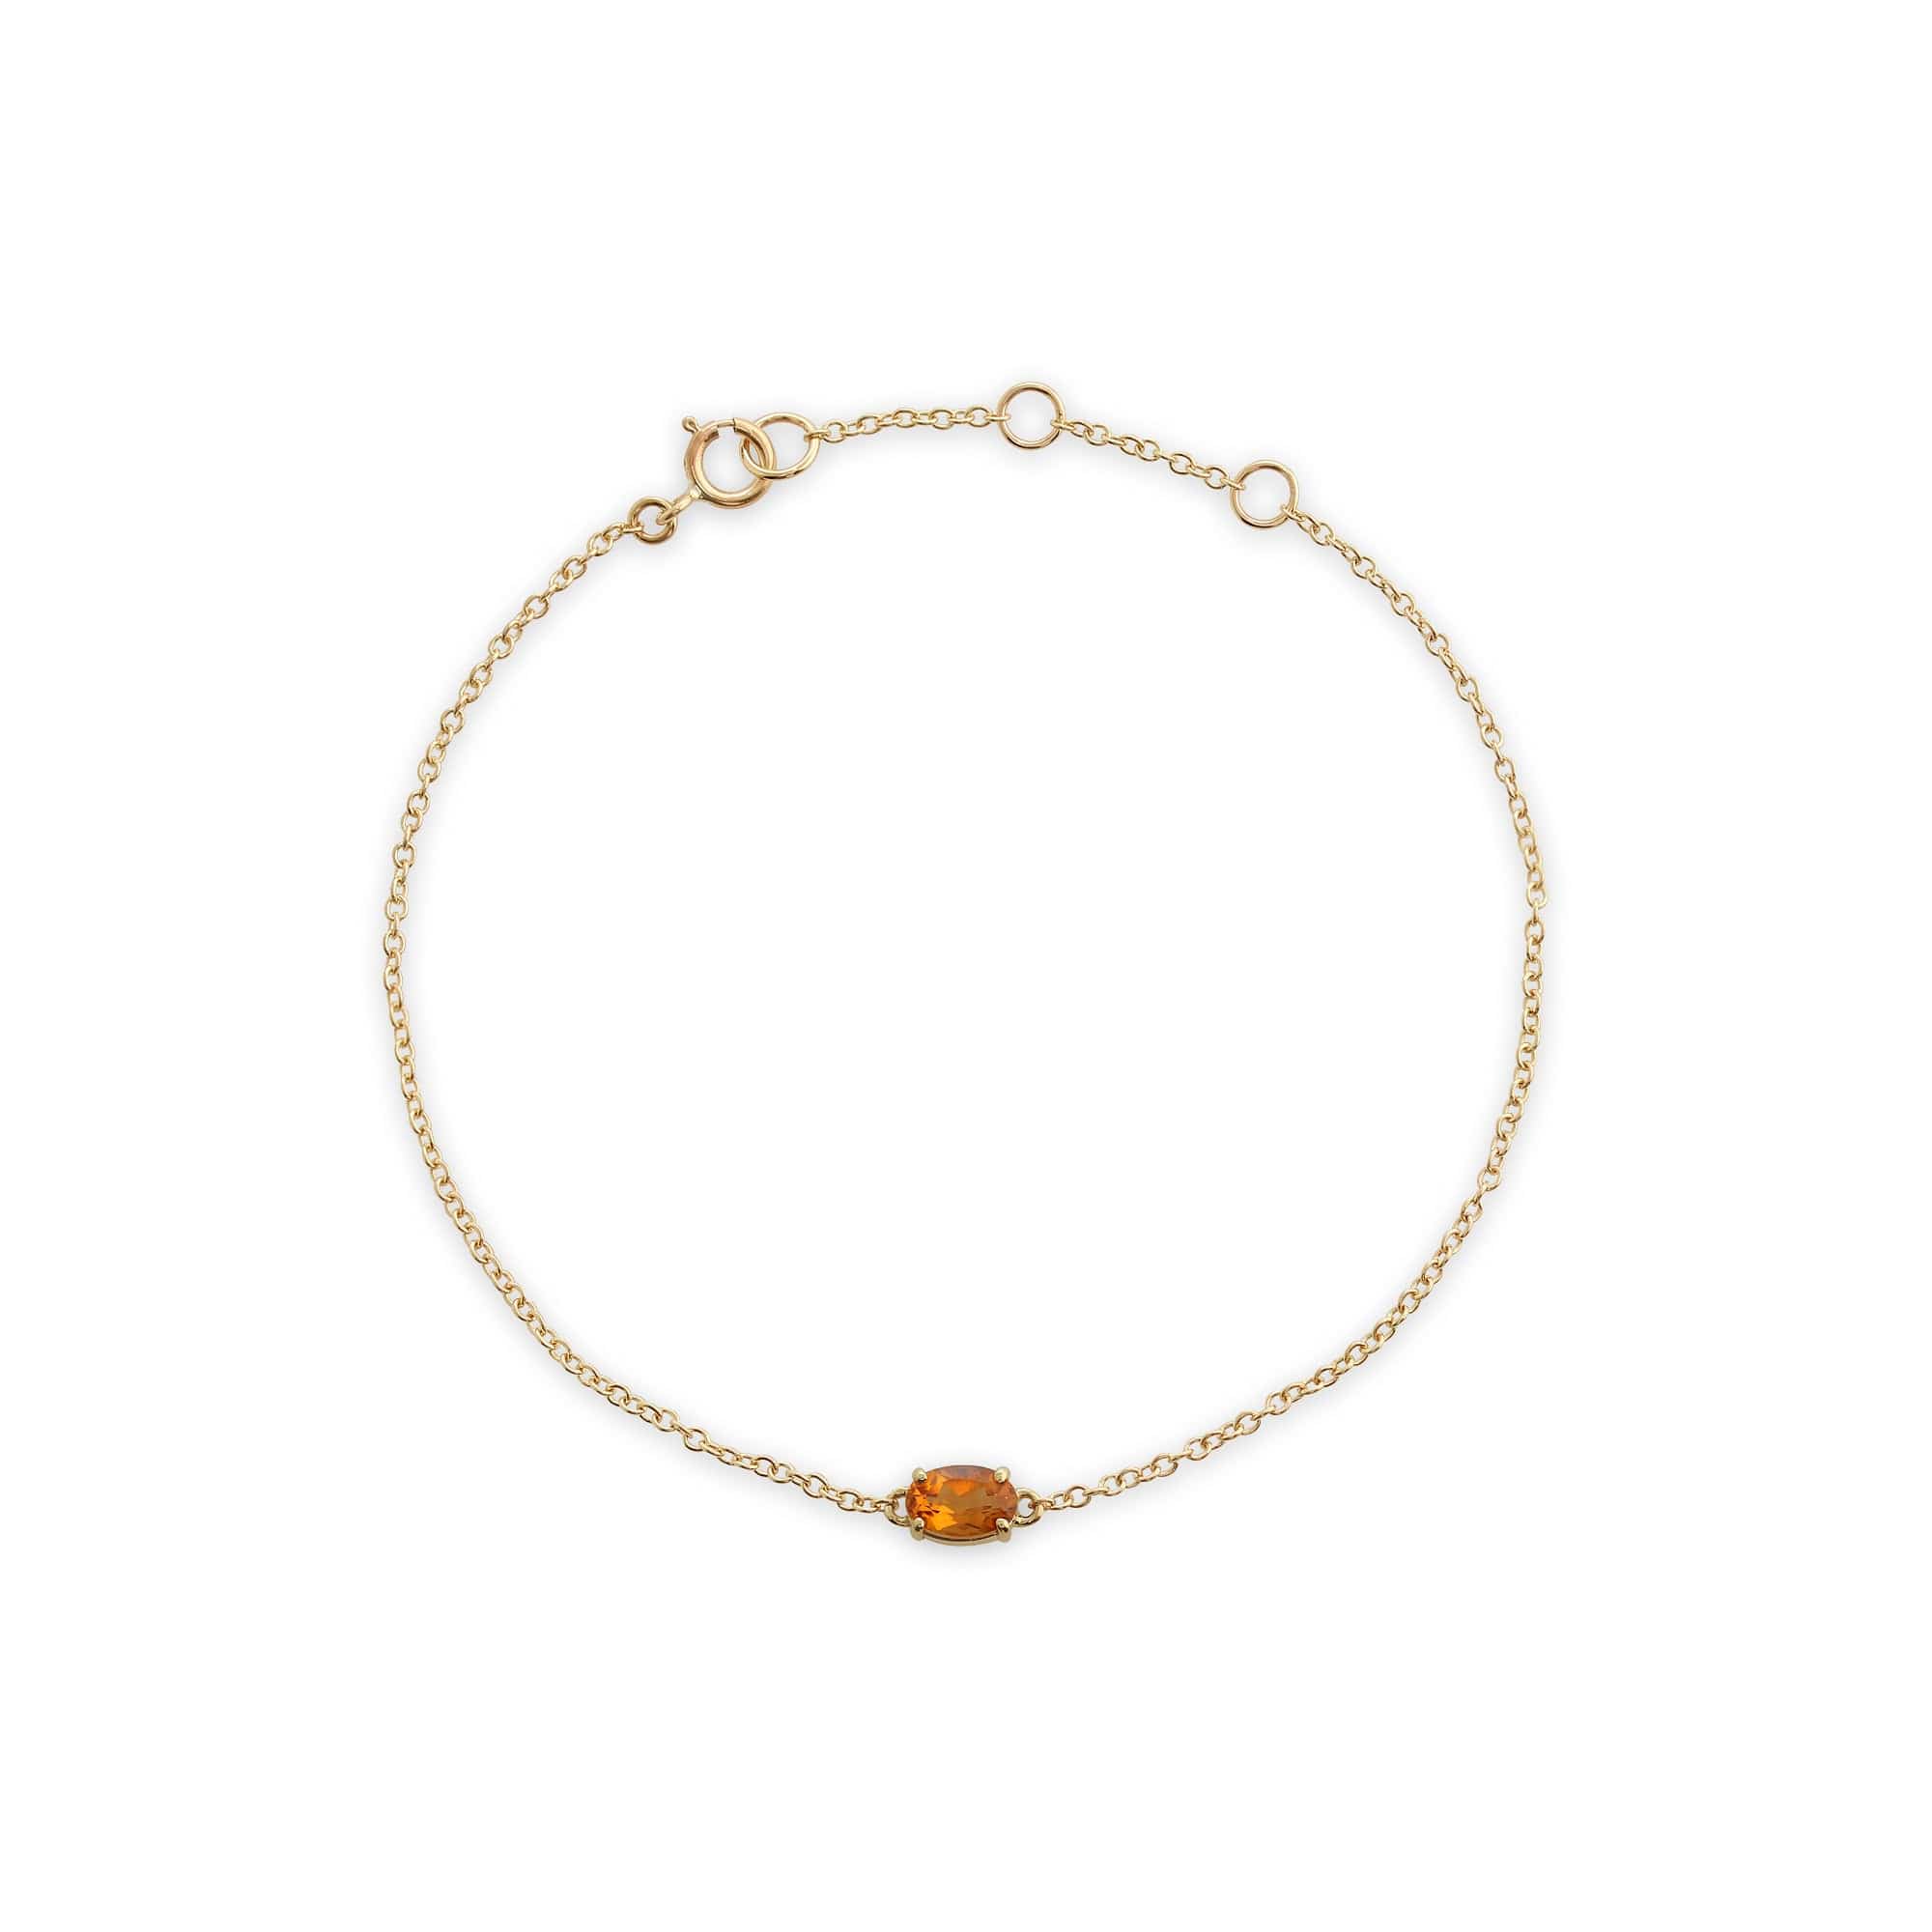 135L0220019 Classic Oval Citrine Single Stone Bracelet in 9ct Yellow Gold 1